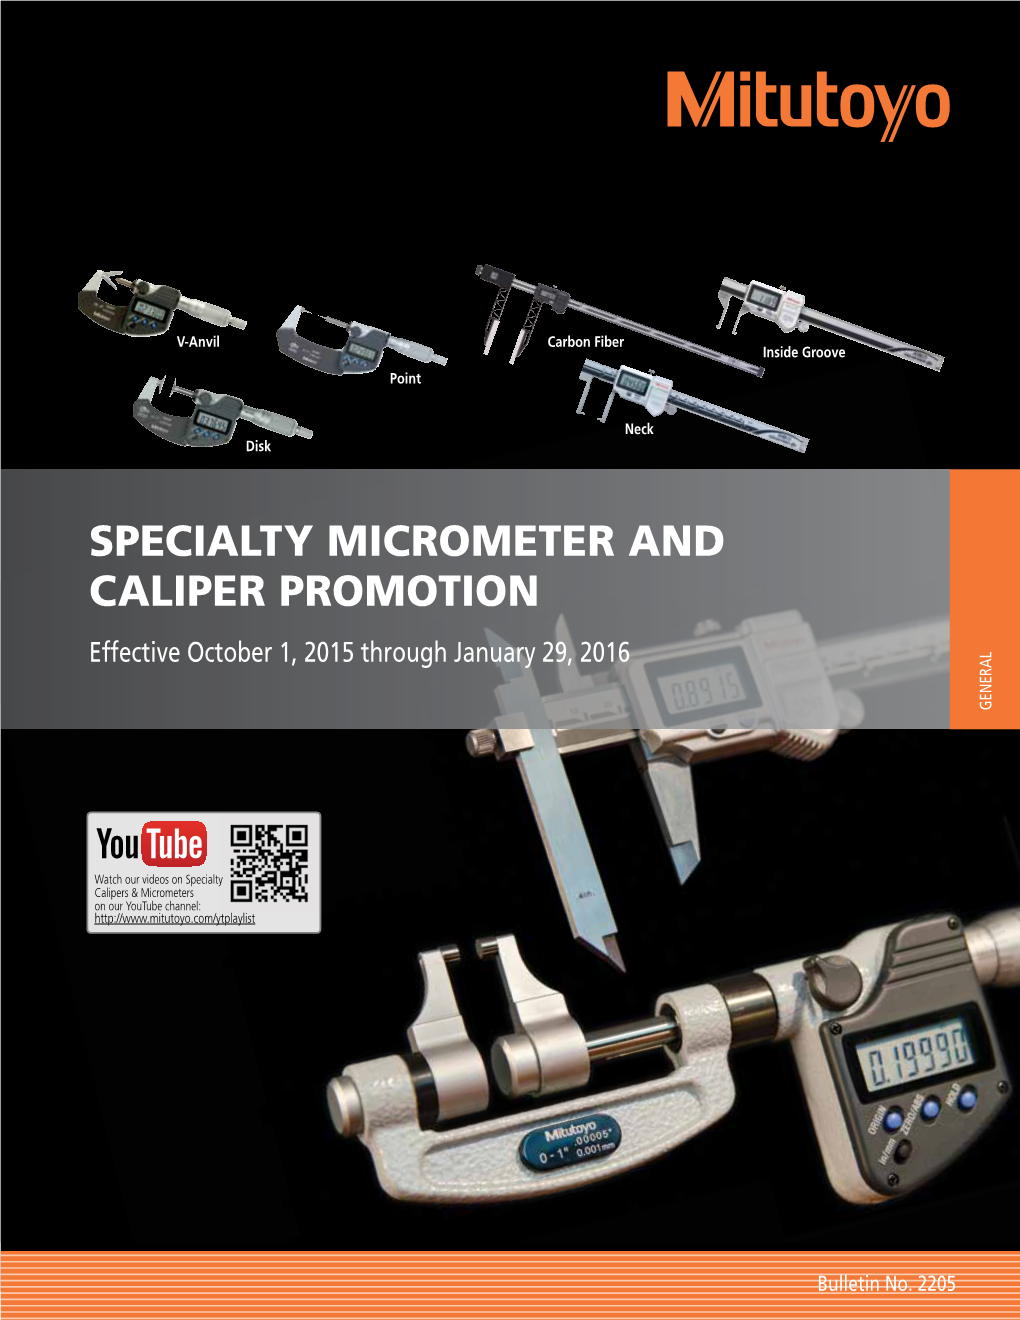 Specialty Micrometer and Caliper Promotion Effective October 1, 2015 Through January 29, 2016 Ge N Eral